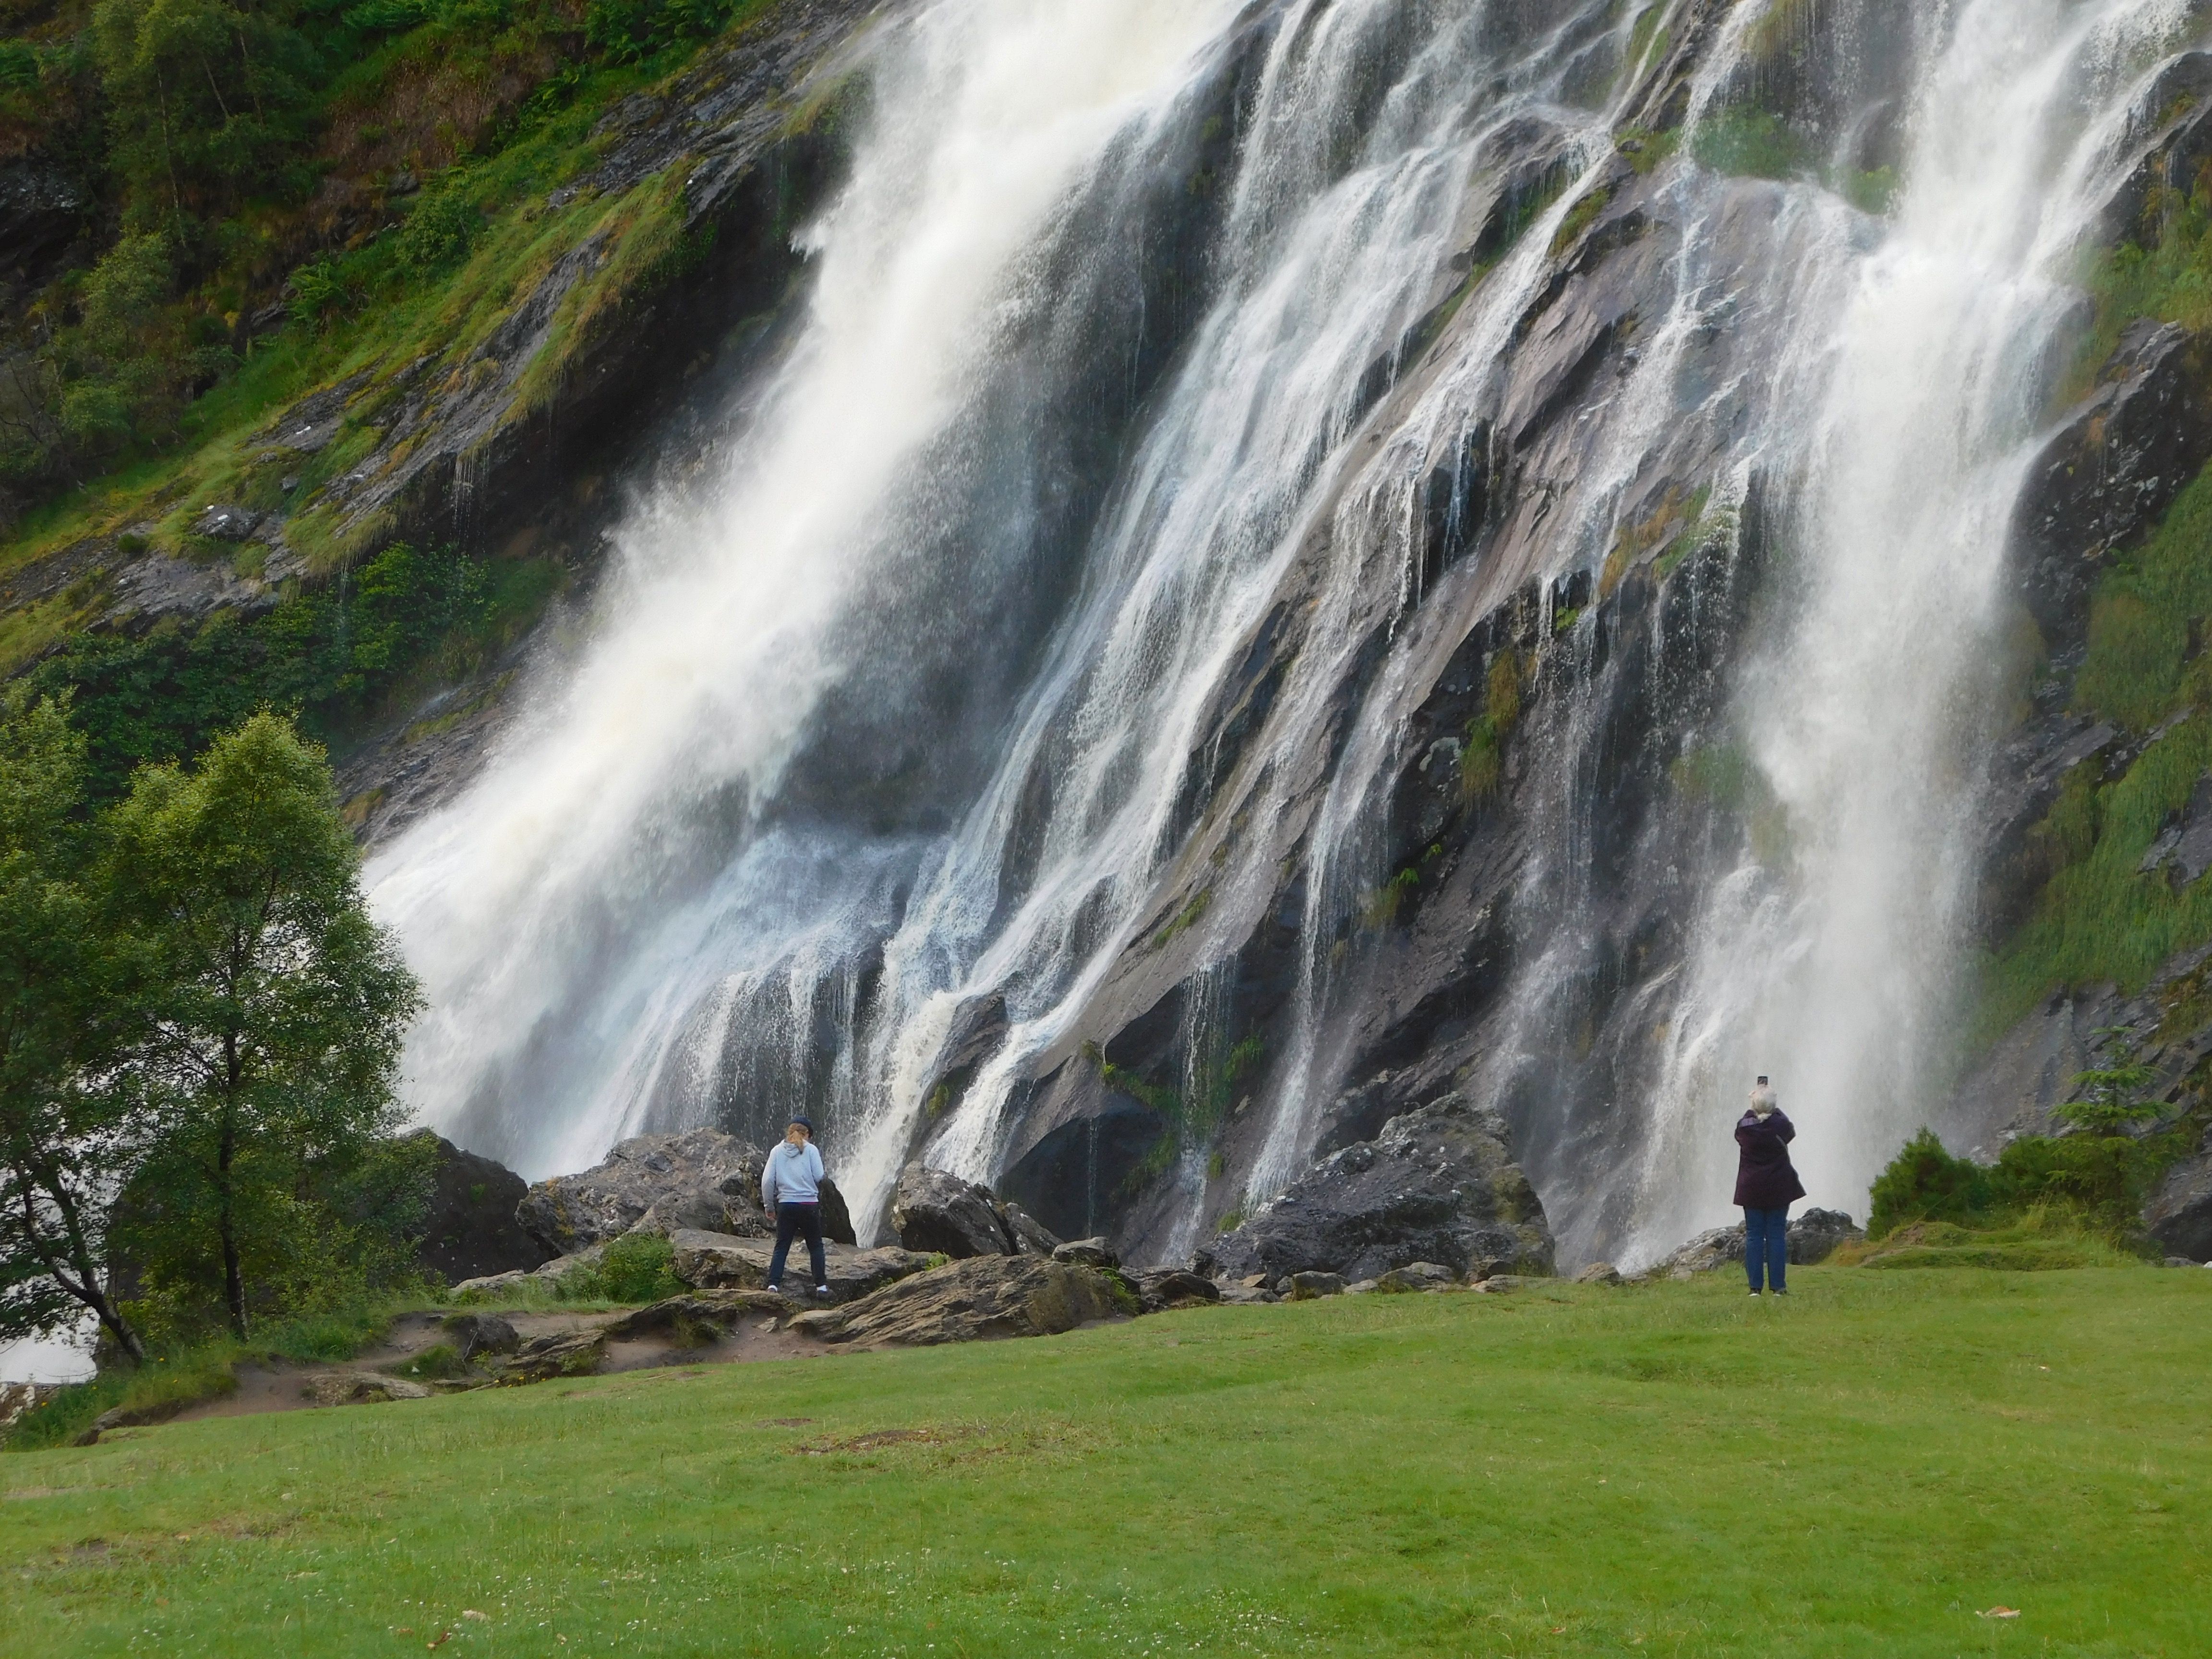 Our last evening in Ireland was spent at the base of the magnificient Powerscourt Waterfalls which is 127 meters (that's 397 feet) and the highest waterfalls in Ireland.